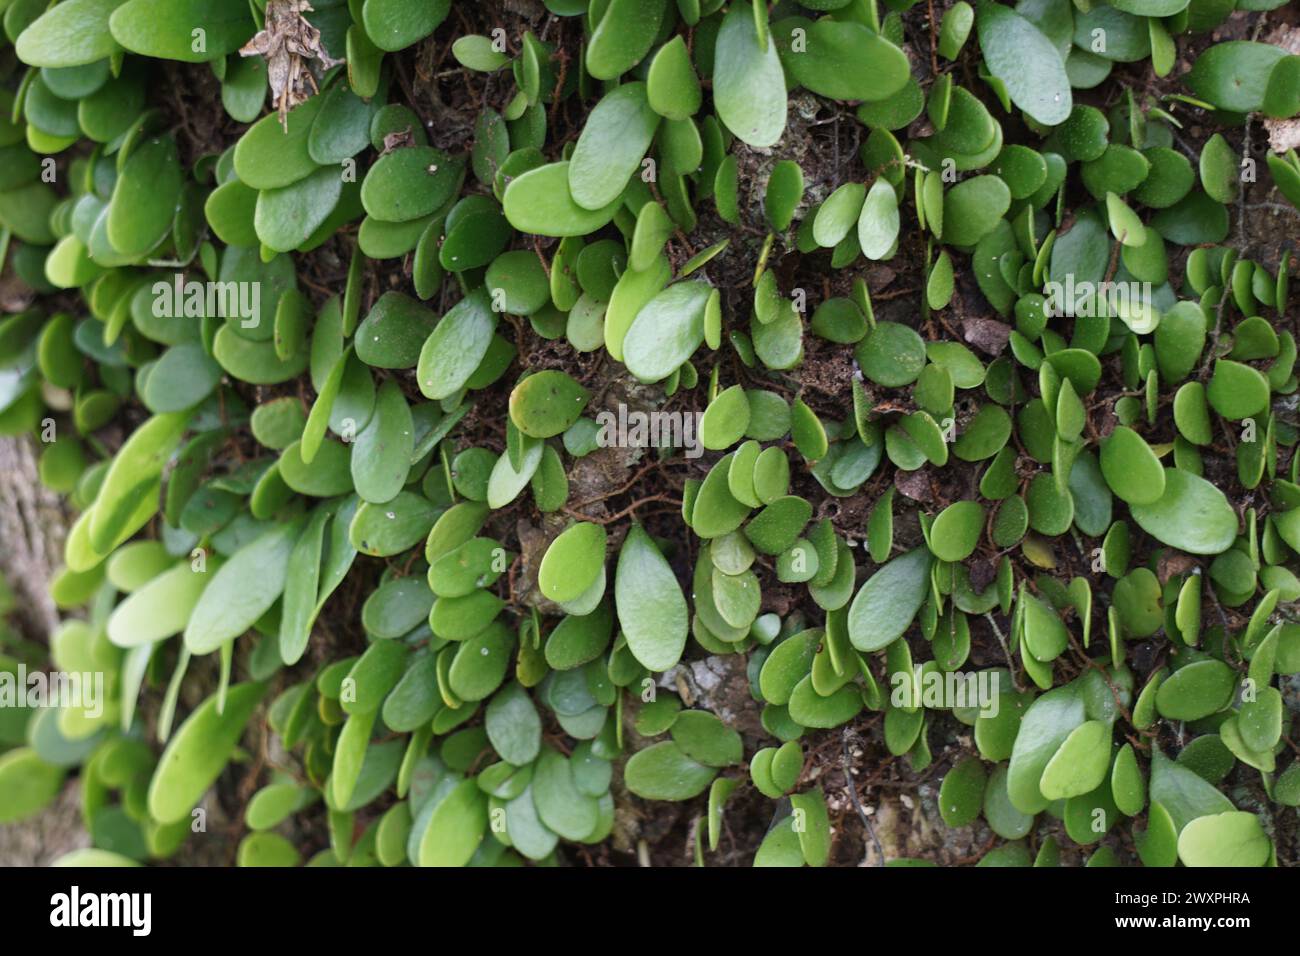 Pyrrosia rupestris (also called the rock felt fern) on the tree Stock Photo